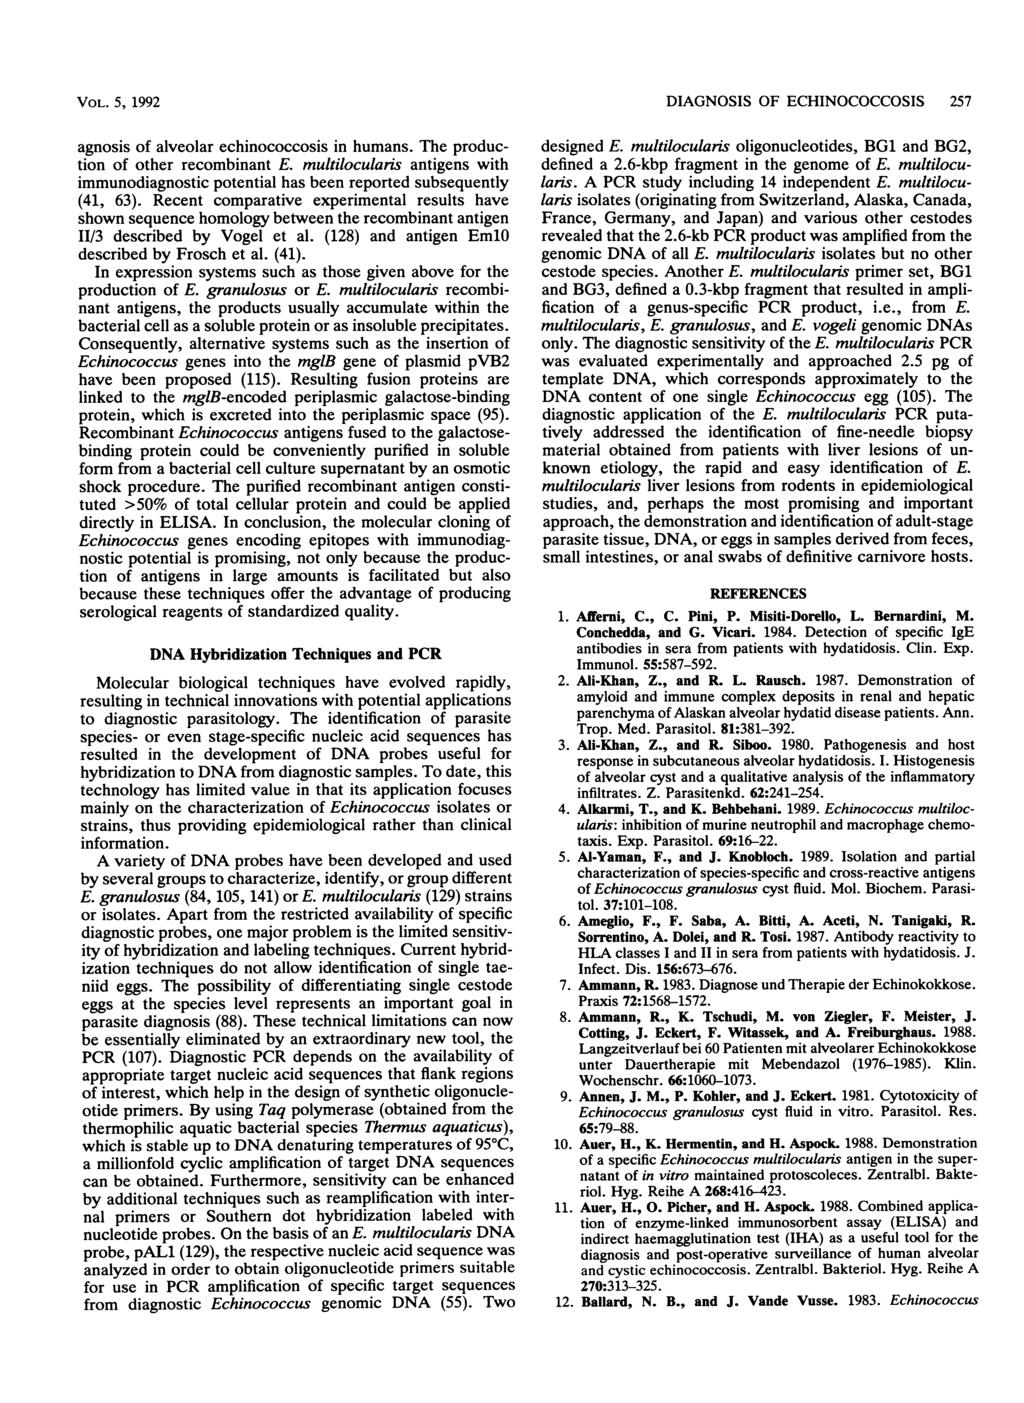 VOL. 5, 1992 agnosis of alveolar echinococcosis in humans. The production of other recombinant E. multilocularis antigens with immunodiagnostic potential has been reported subsequently (41, 63).